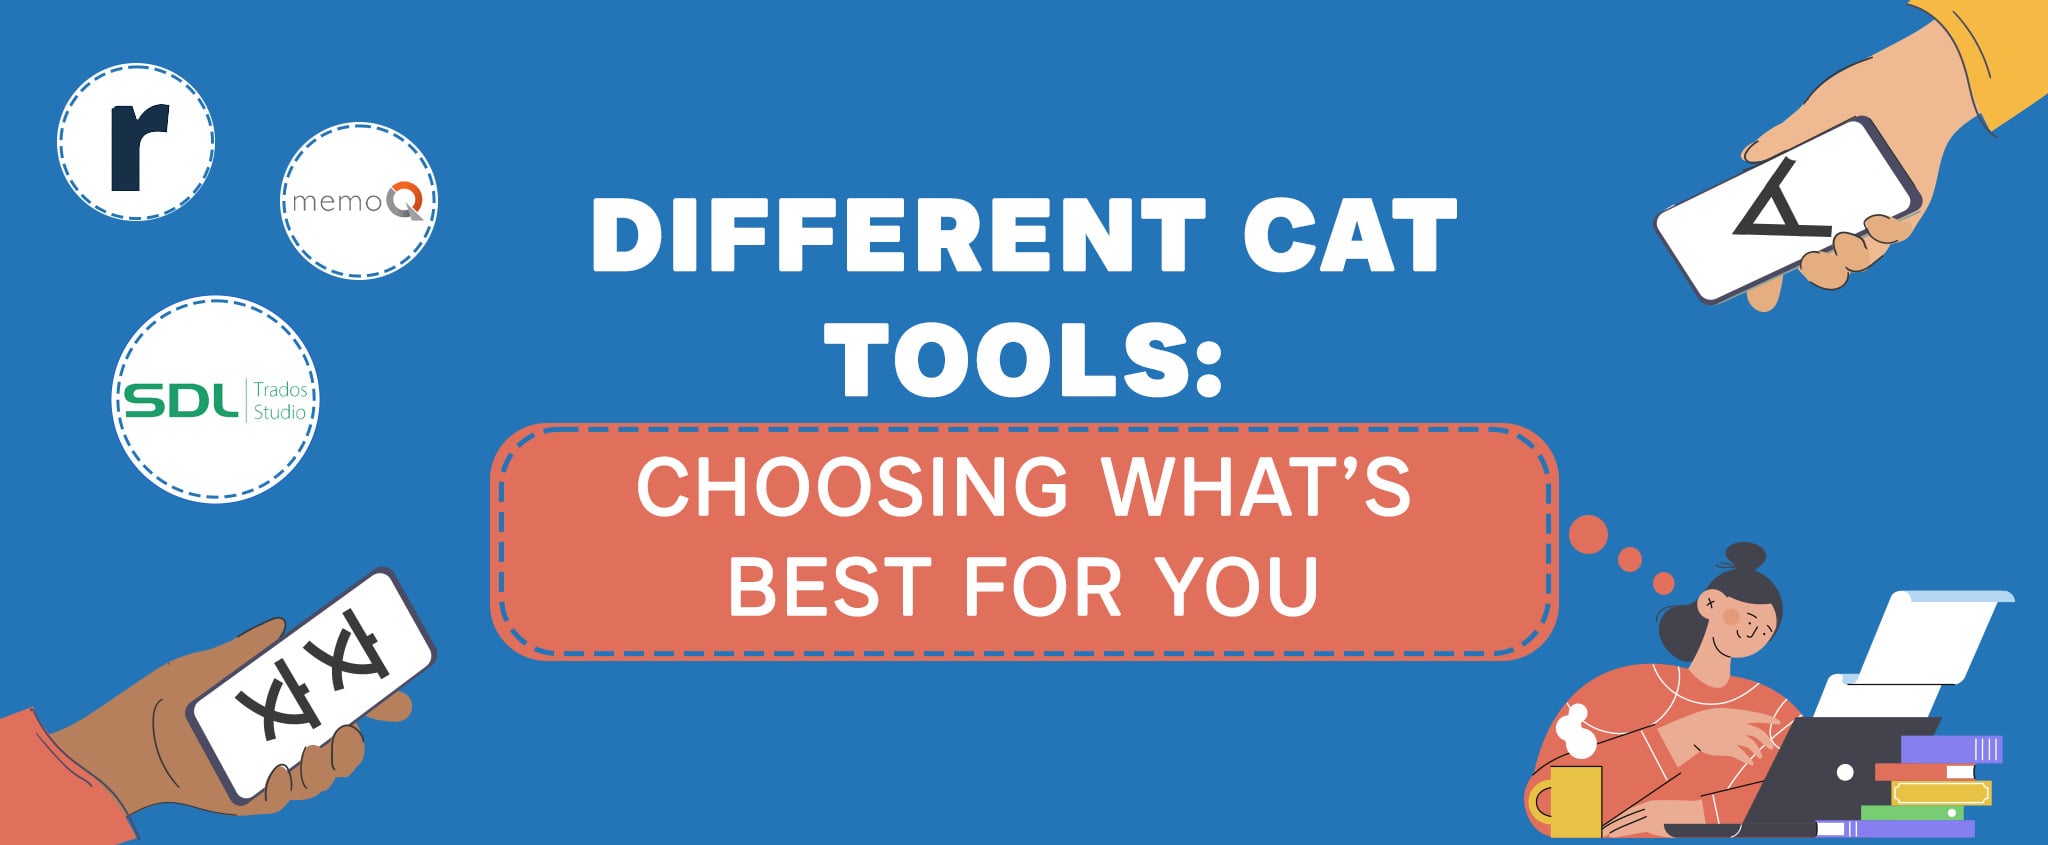 Different CAT Tools : Choosing What’s Best for You